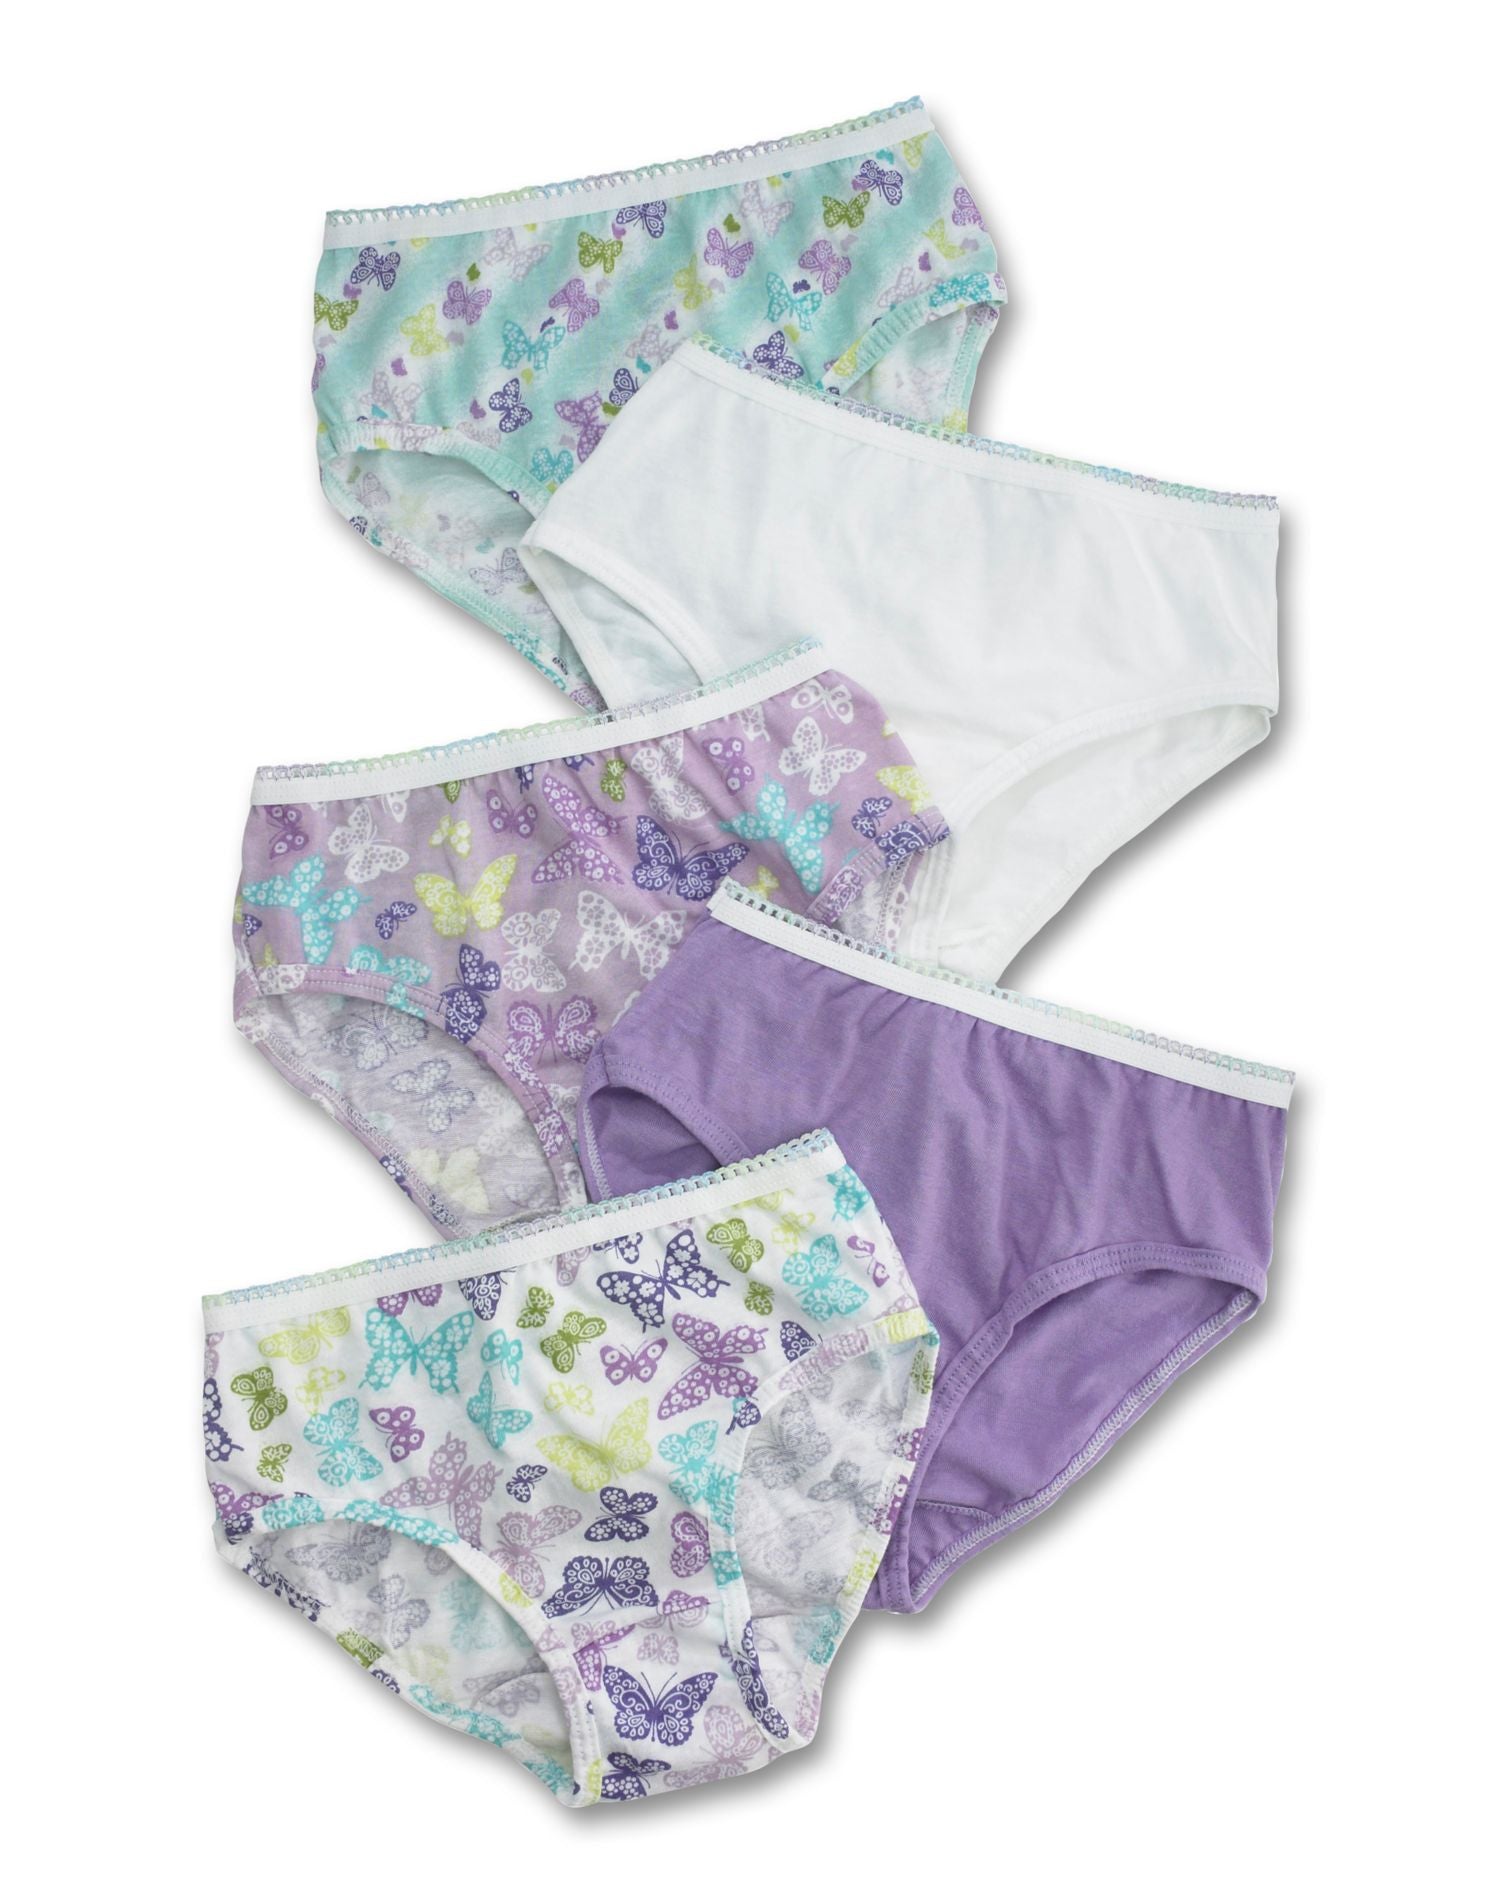 Hanes Girls No Ride Up Cotton Low Rise Briefs 9 Pack Assorted 6